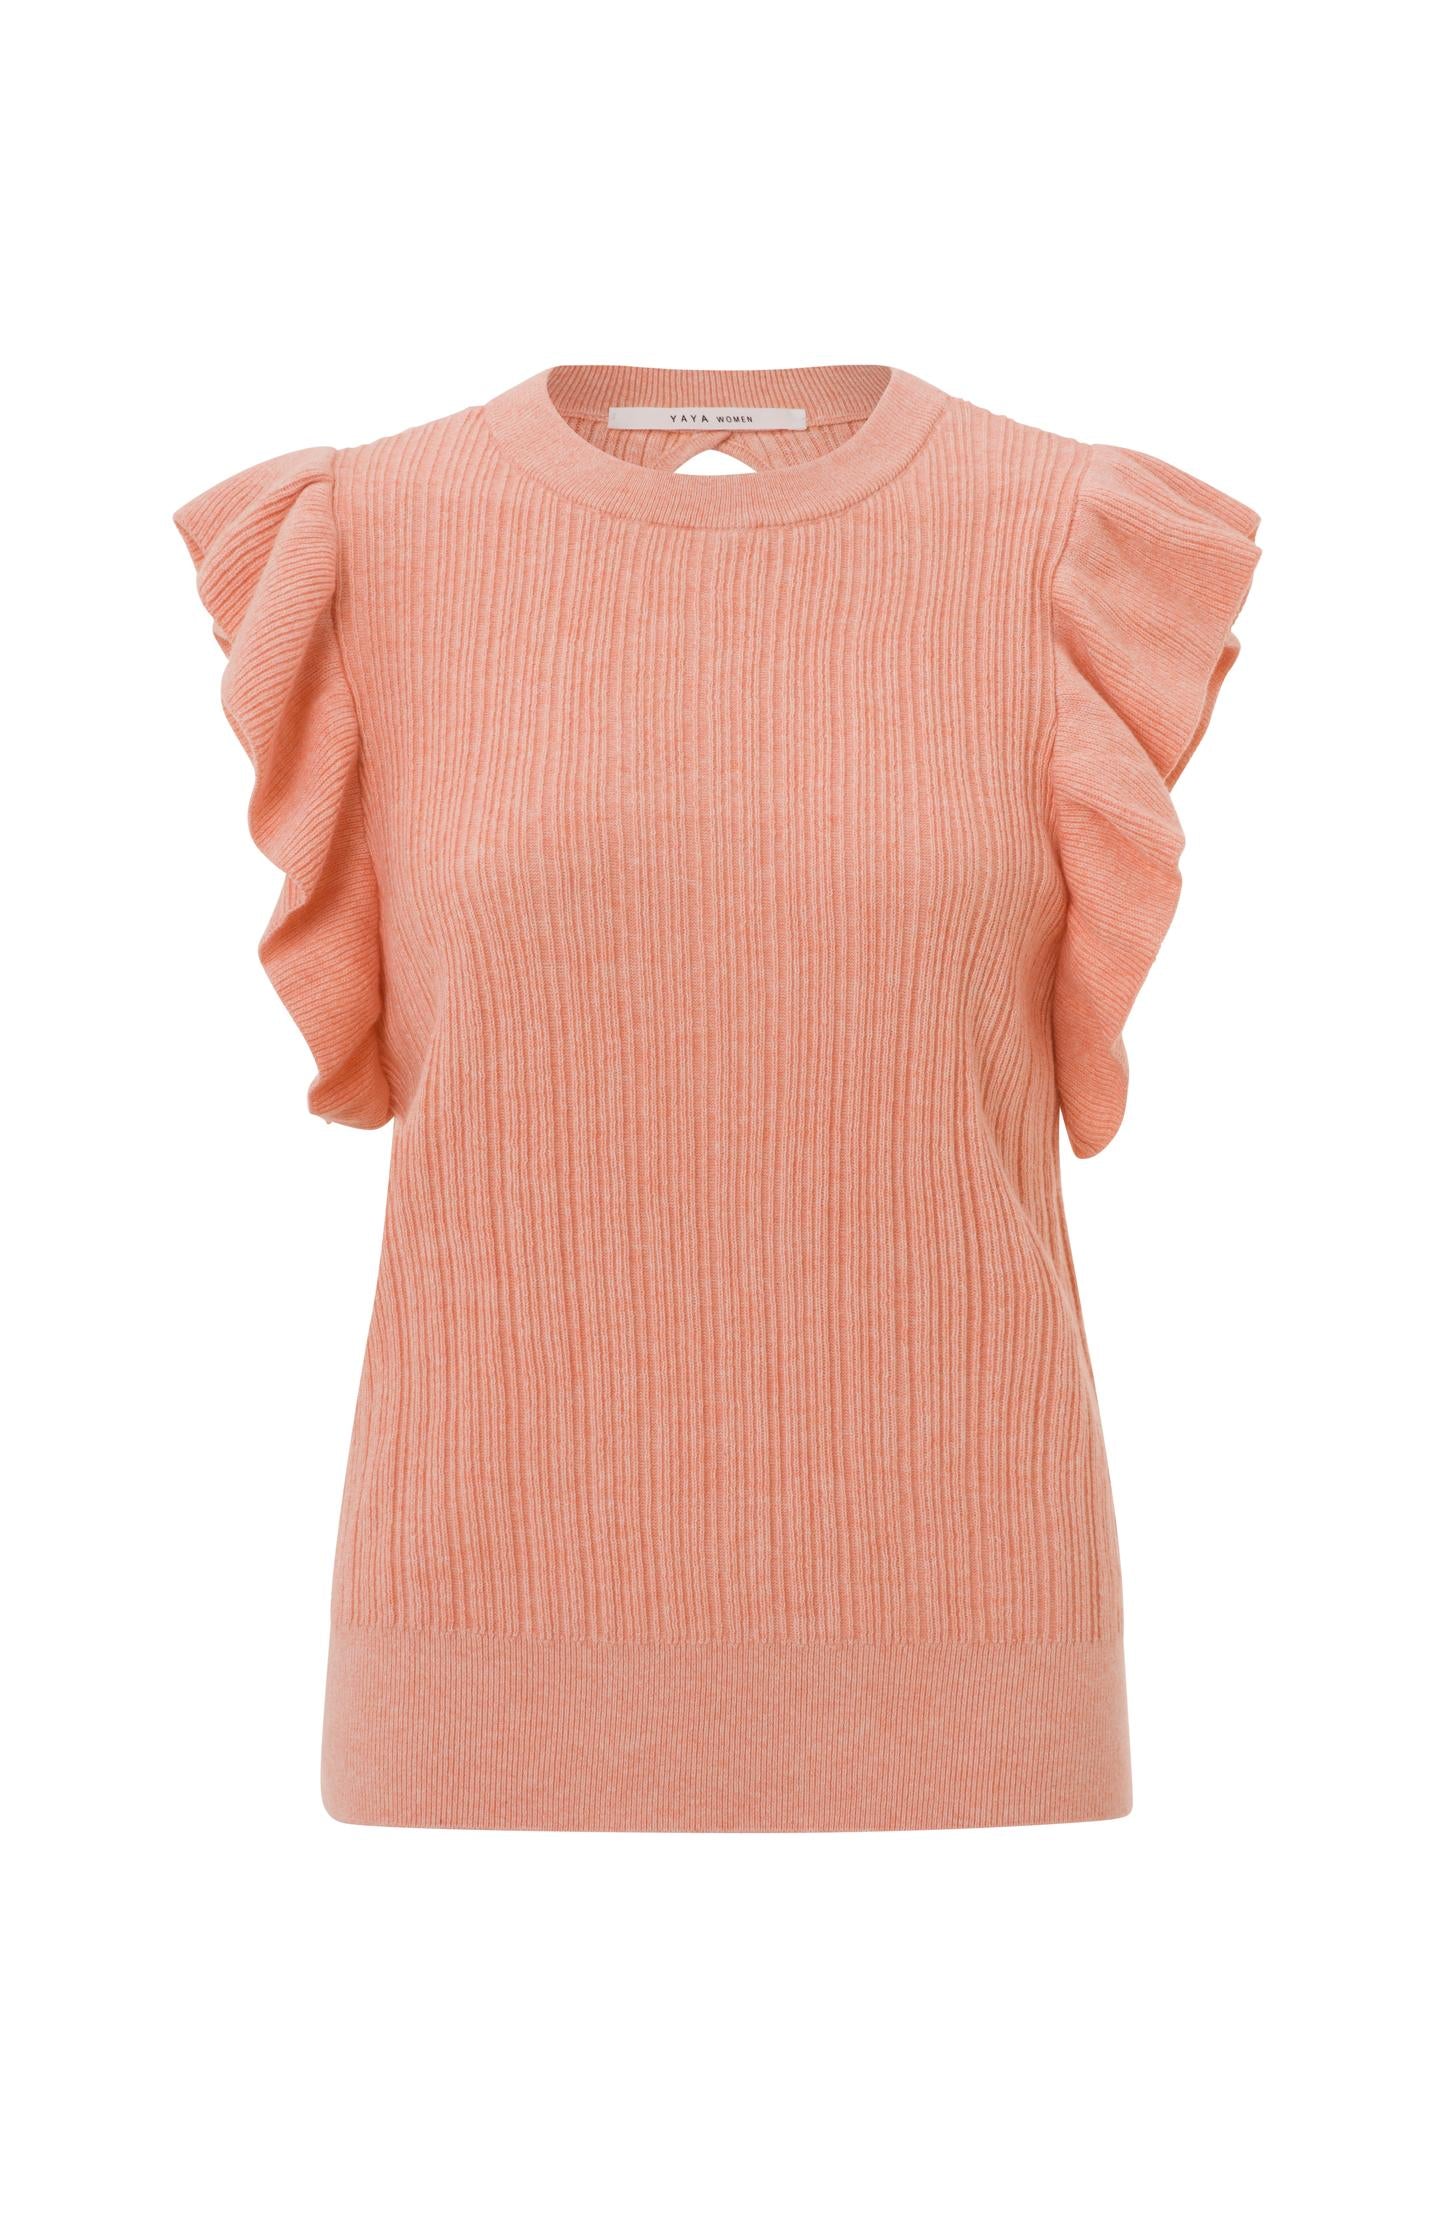 Sweater with round neck, ruffled cap sleeves and back detail - Type: product